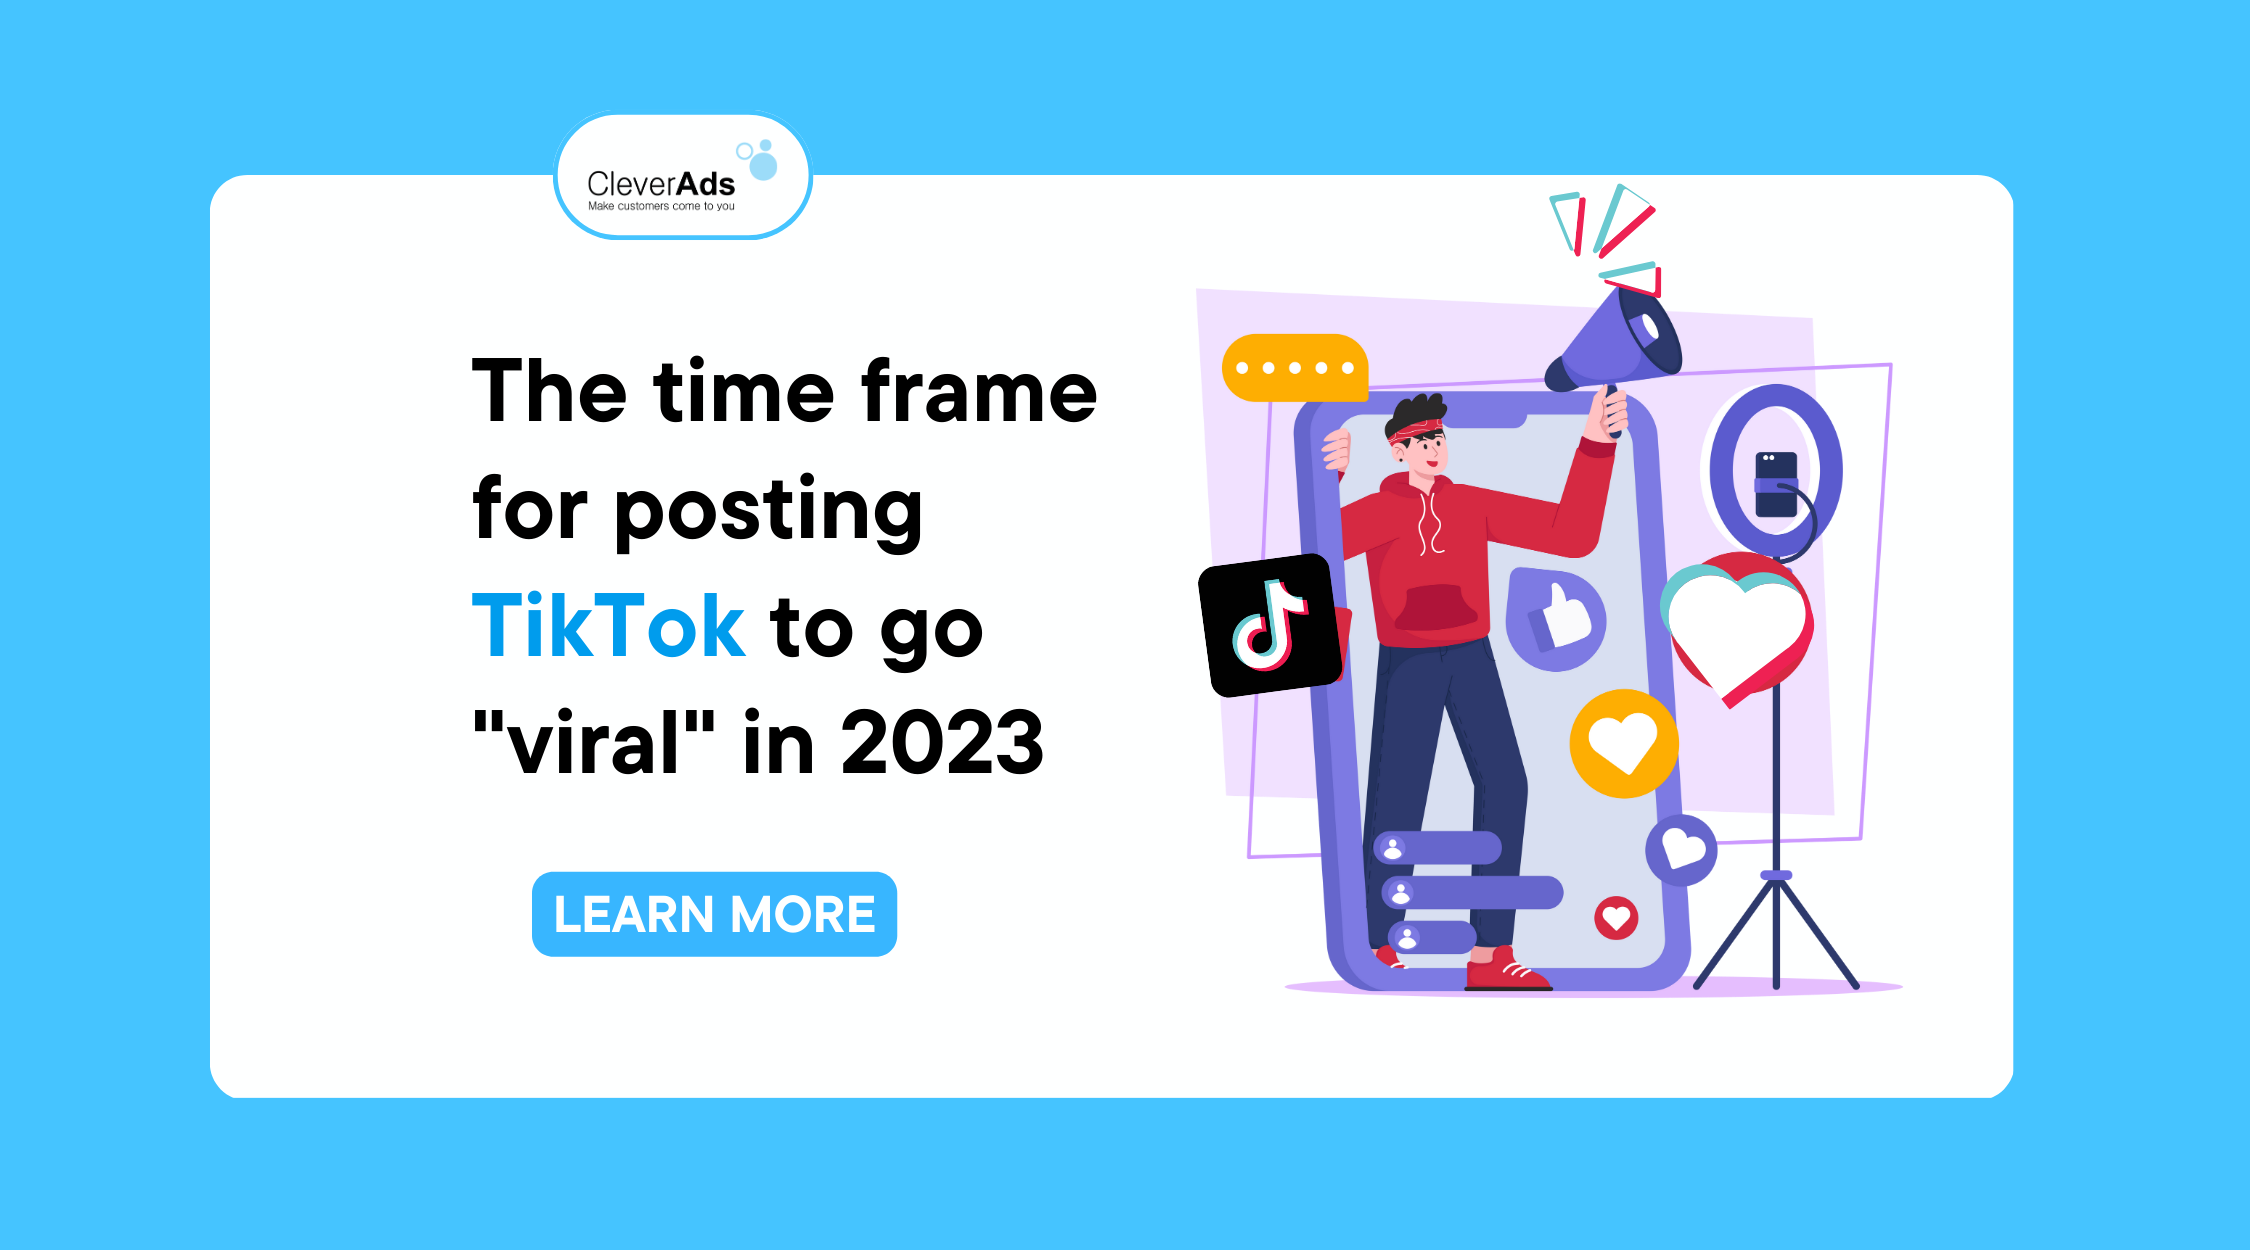 TikTok: The time frame for posting to go “viral” in 2023